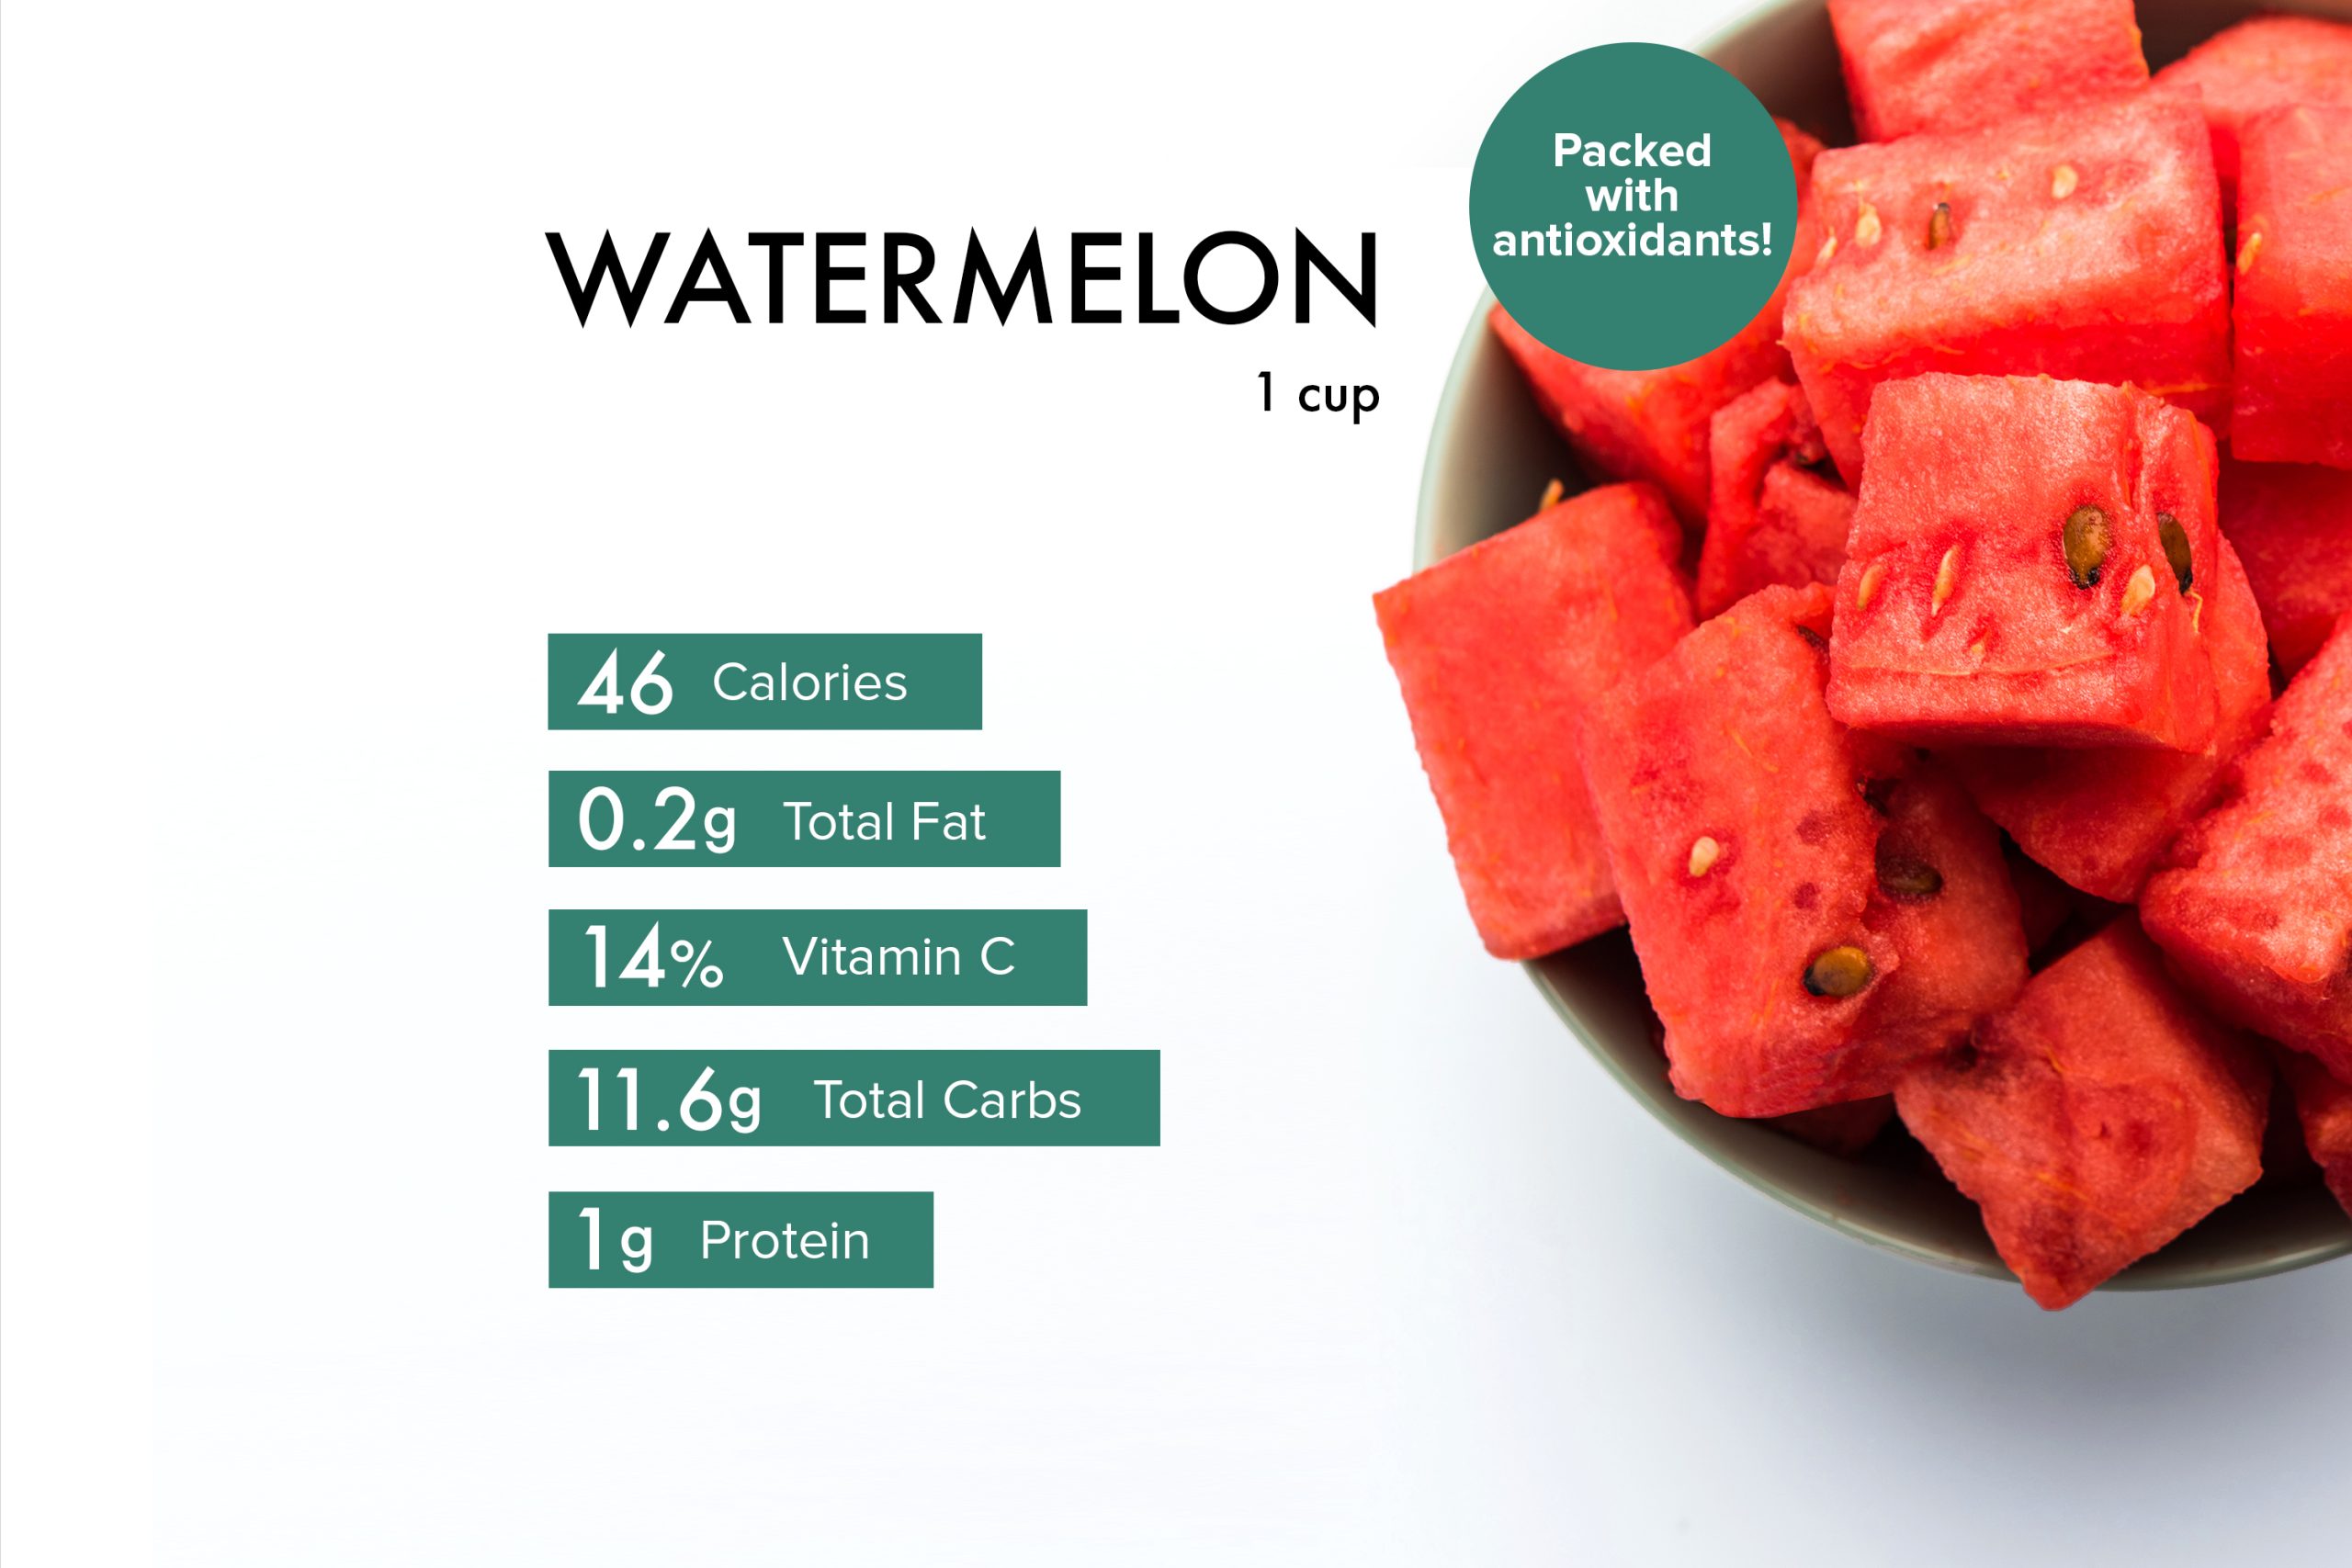 How Many Calories are in a Watermelon?